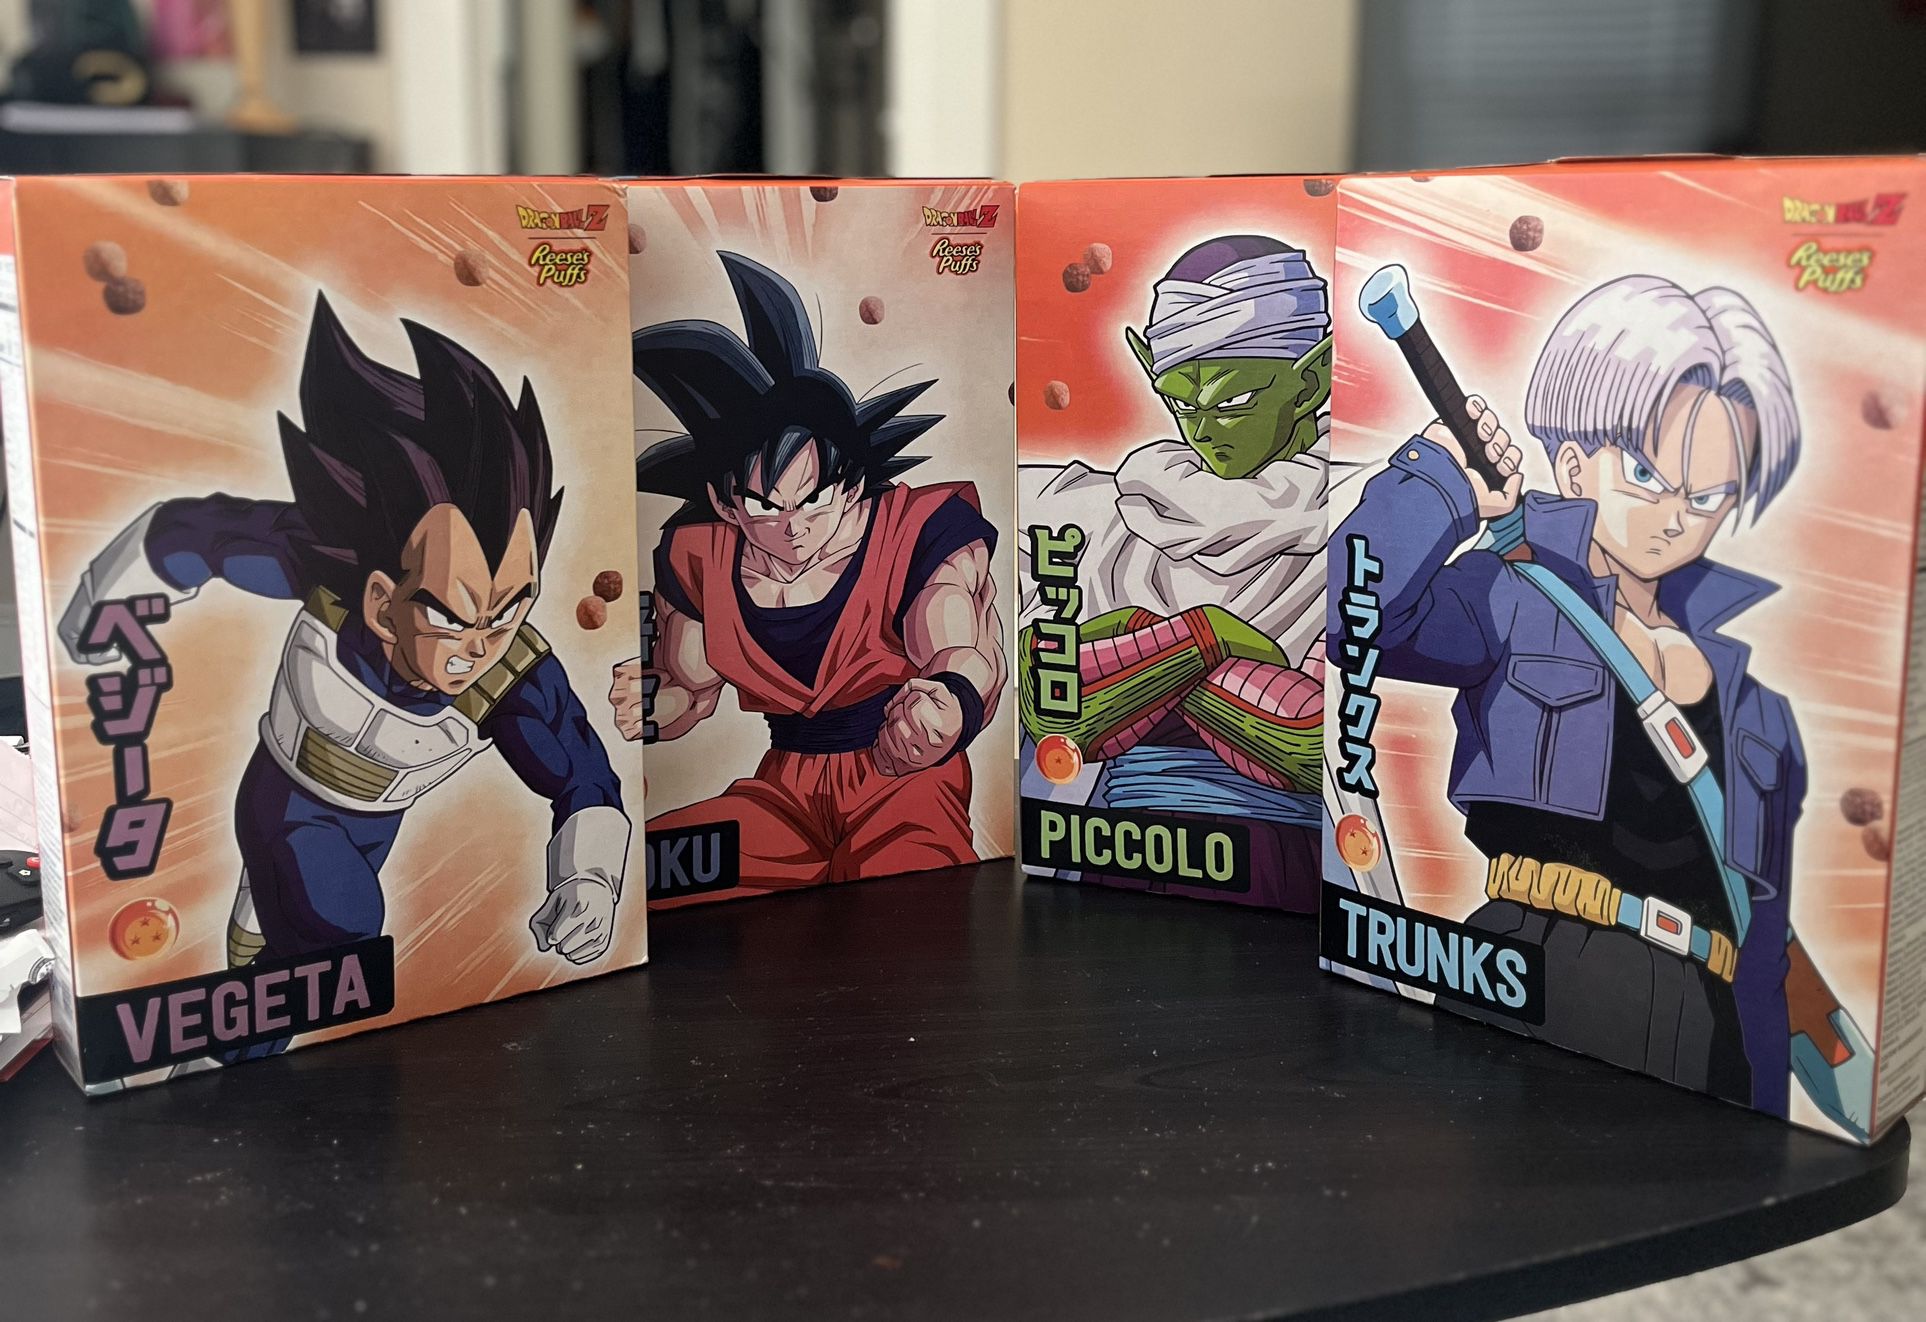 Reese’s puffs X DBZ Dragonball Z Goku Collab Limited Edition Full Set 